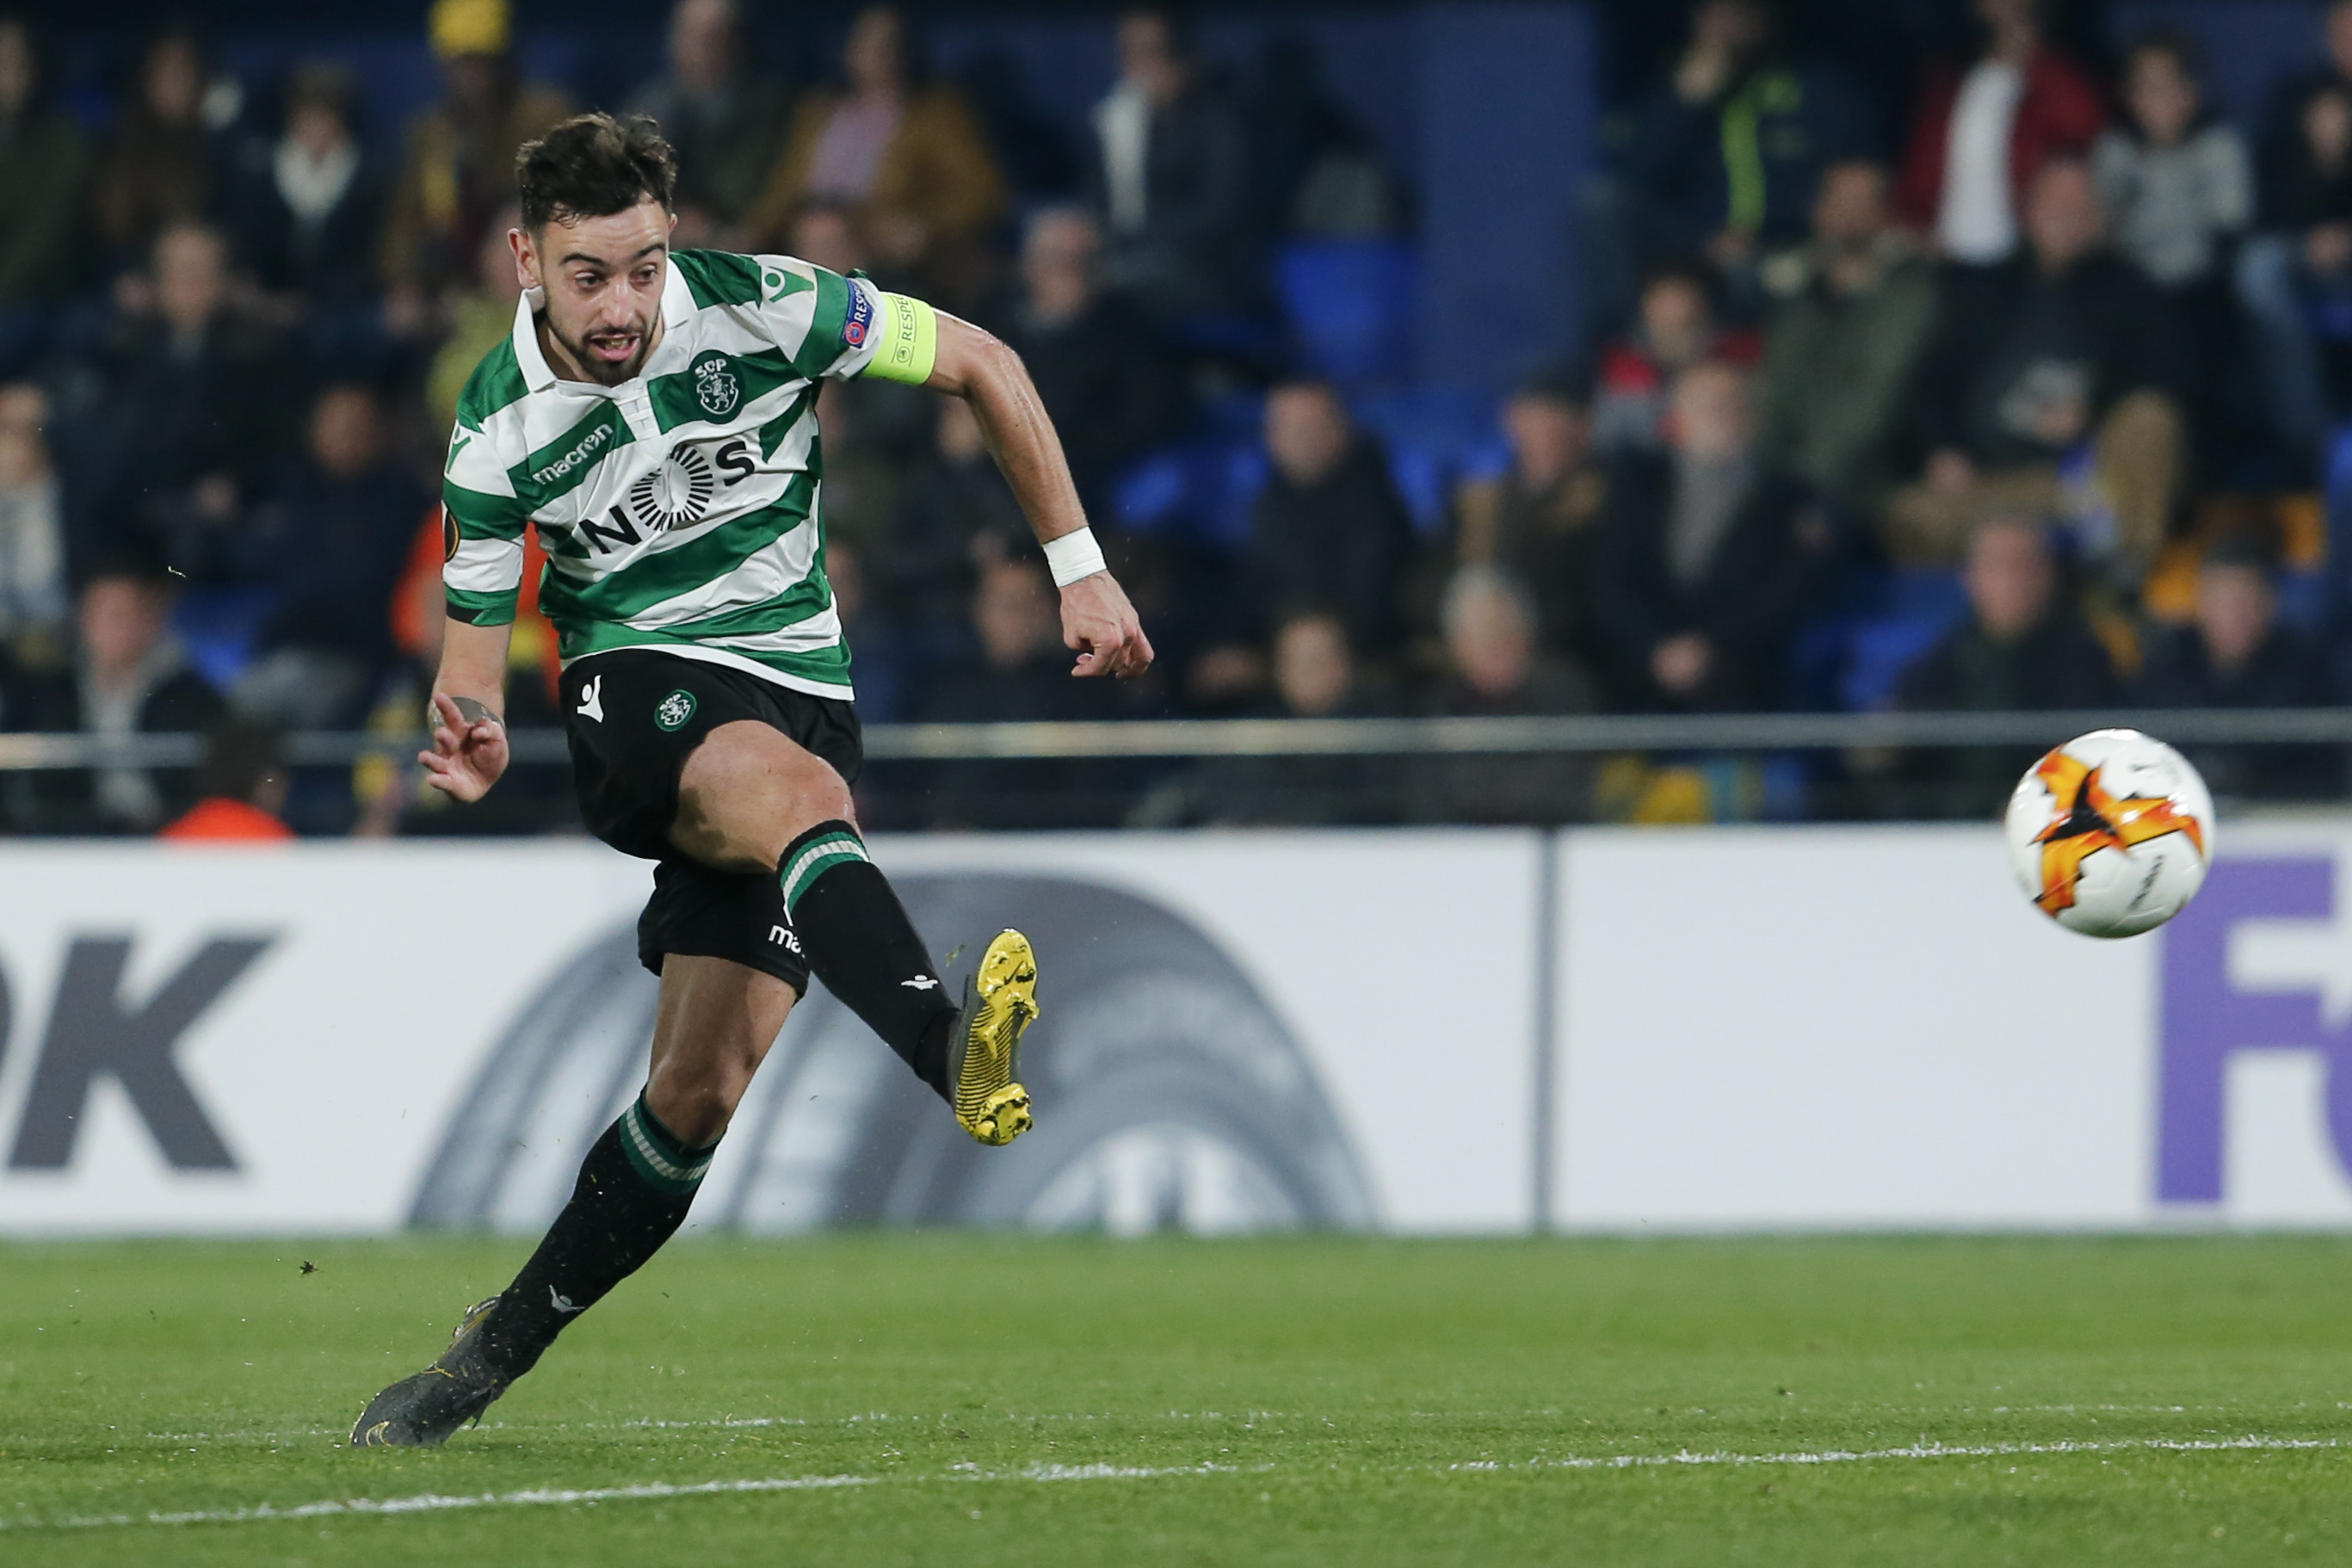 TOPSHOT - Sporting's Portuguese midfielder Bruno Fernandes scores during the UEFA Europa League round of 32 second leg football match between Villarreal CF and Sporting CP at the Ceramica stadium in Villarreal on February 21, 2019. (Photo by PAU BARRENA / AFP)        (Photo credit should read PAU BARRENA/AFP/Getty Images)